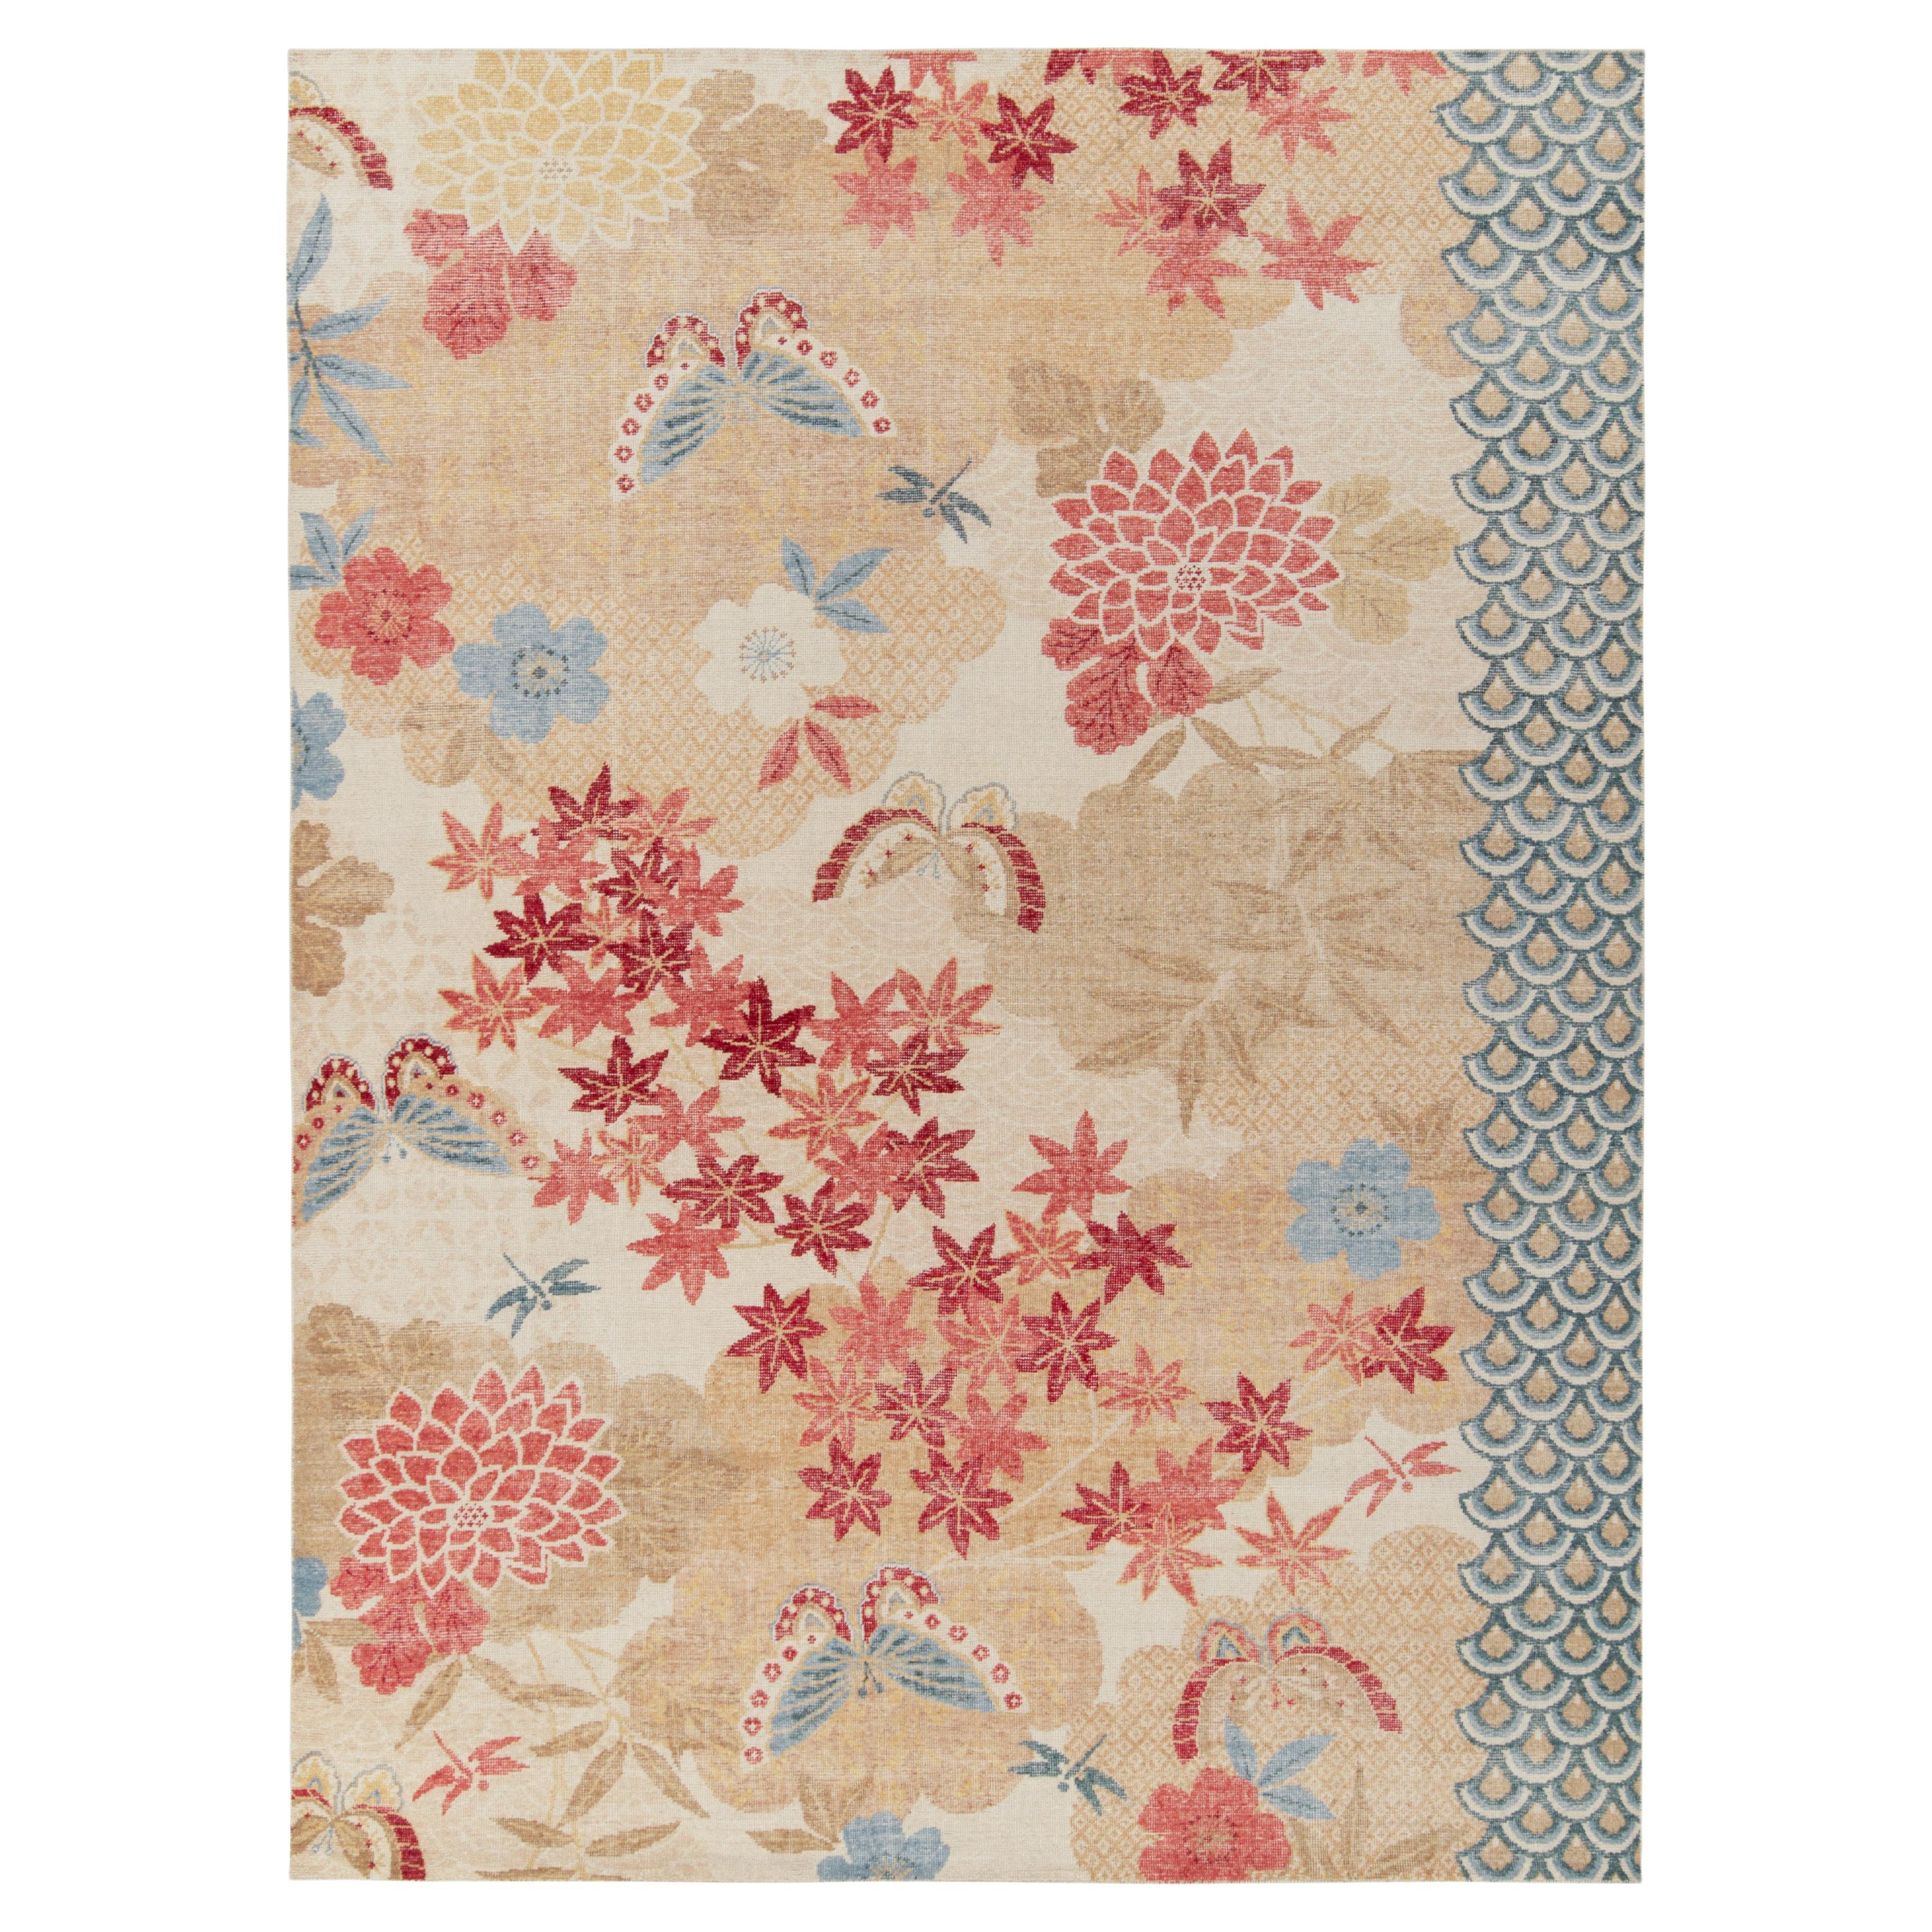 Rug & Kilim's Distressed Japanese Style Rug in Beige, Red, Blue Pictorials For Sale